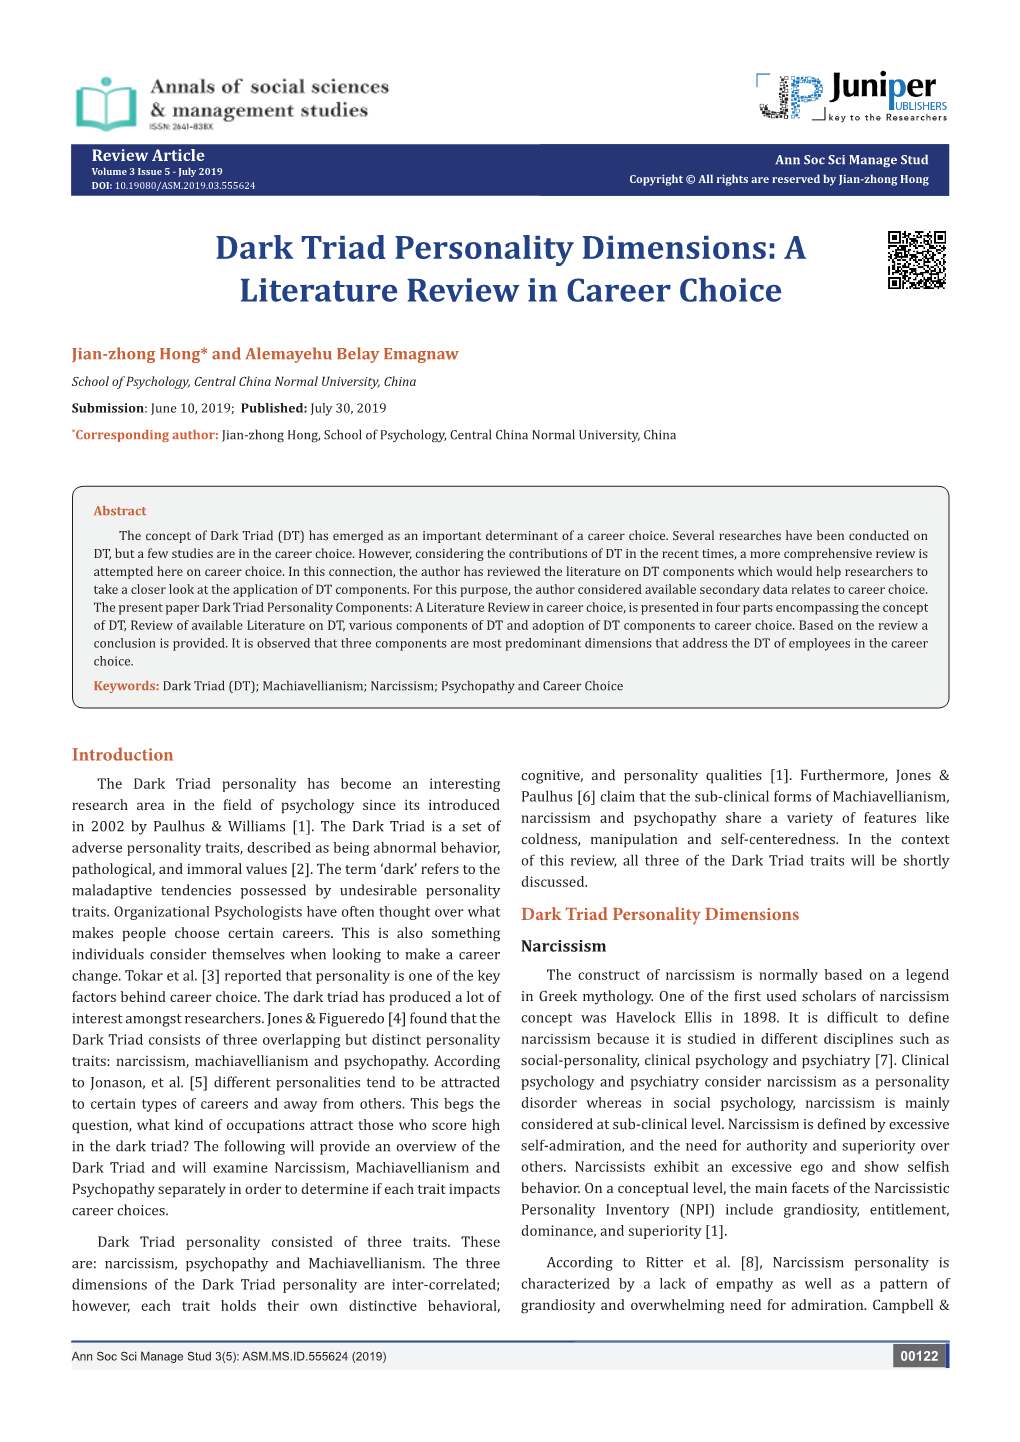 Dark Triad Personality Dimensions: a Literature Review in Career Choice